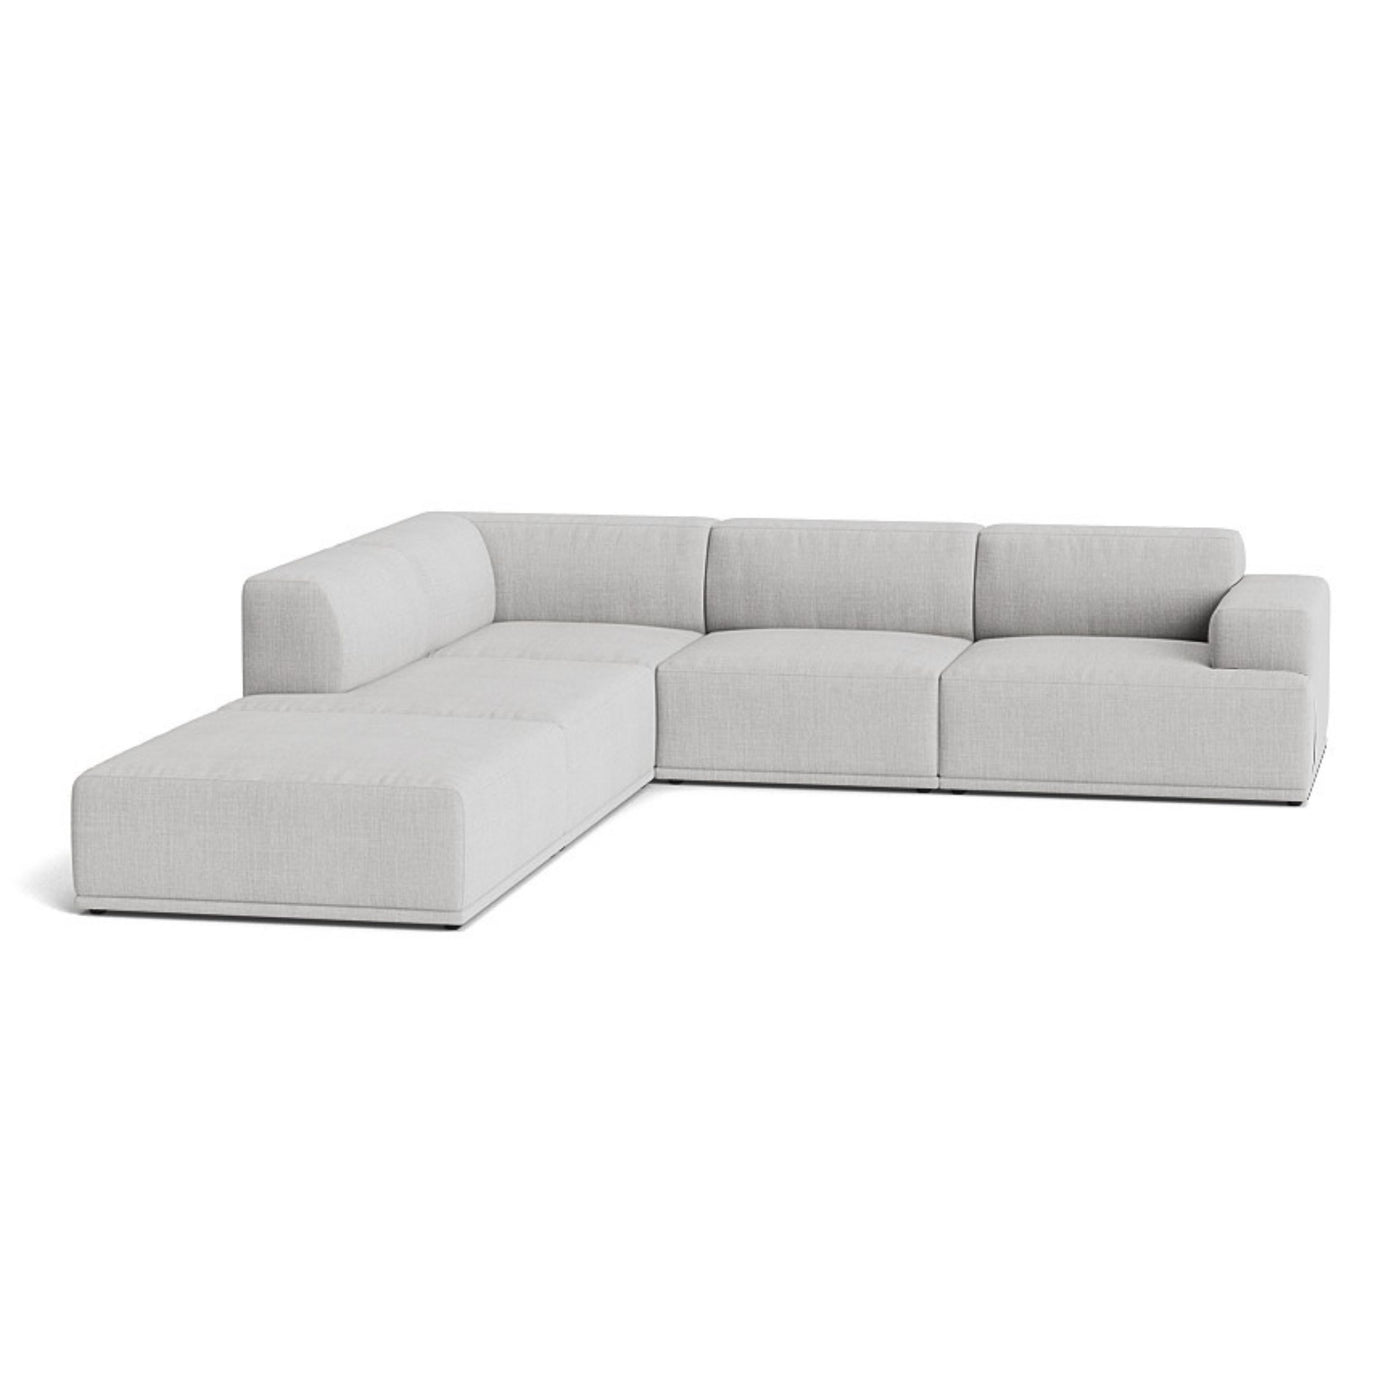 Muuto Connect Soft Modular Corner Sofa, configuration 1. Made-to-order from someday designs. #colour_remix-123